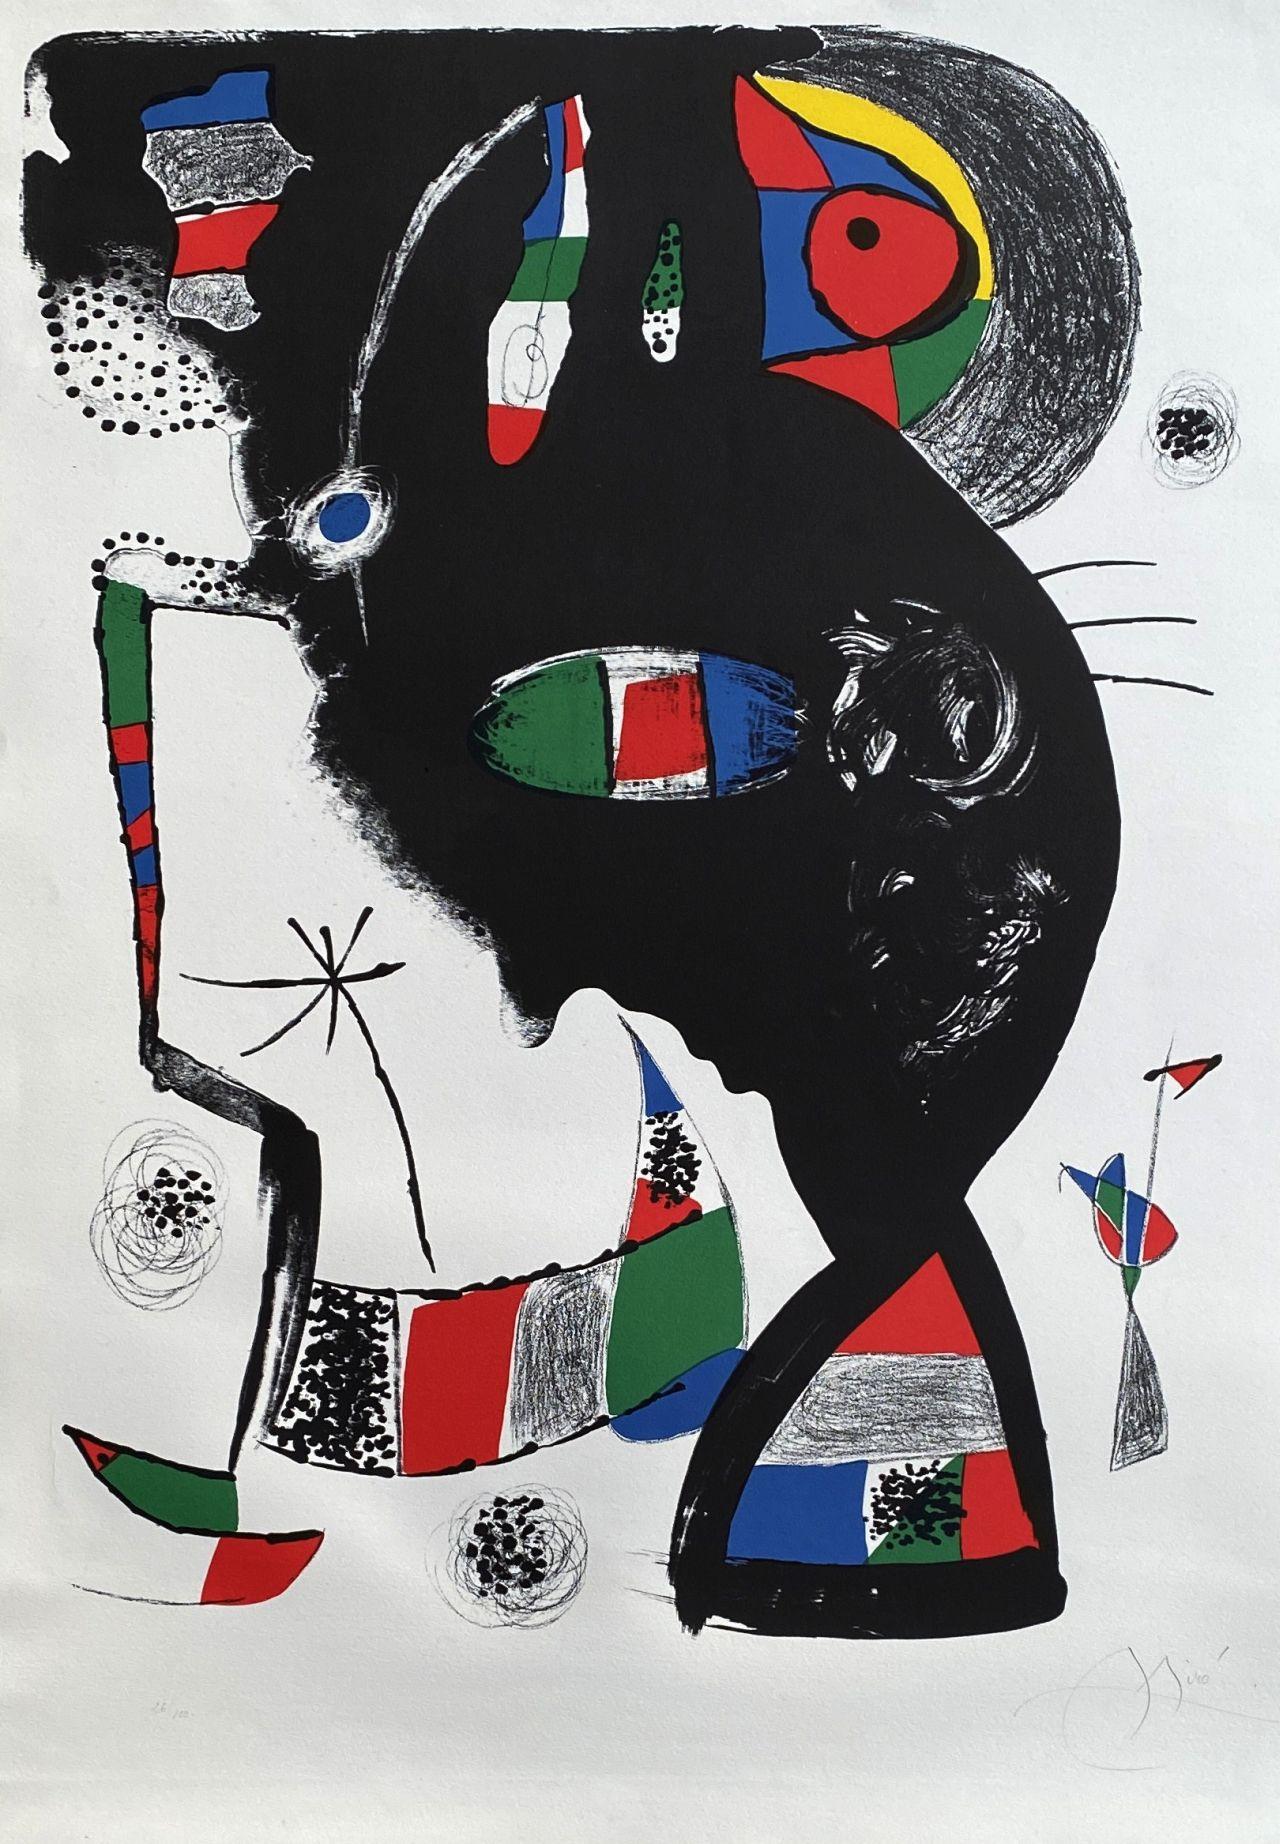 Joan Miró Abstract Print - 42 rue Blomet - Original Lithograph Handsigned Numbered - 100 copies